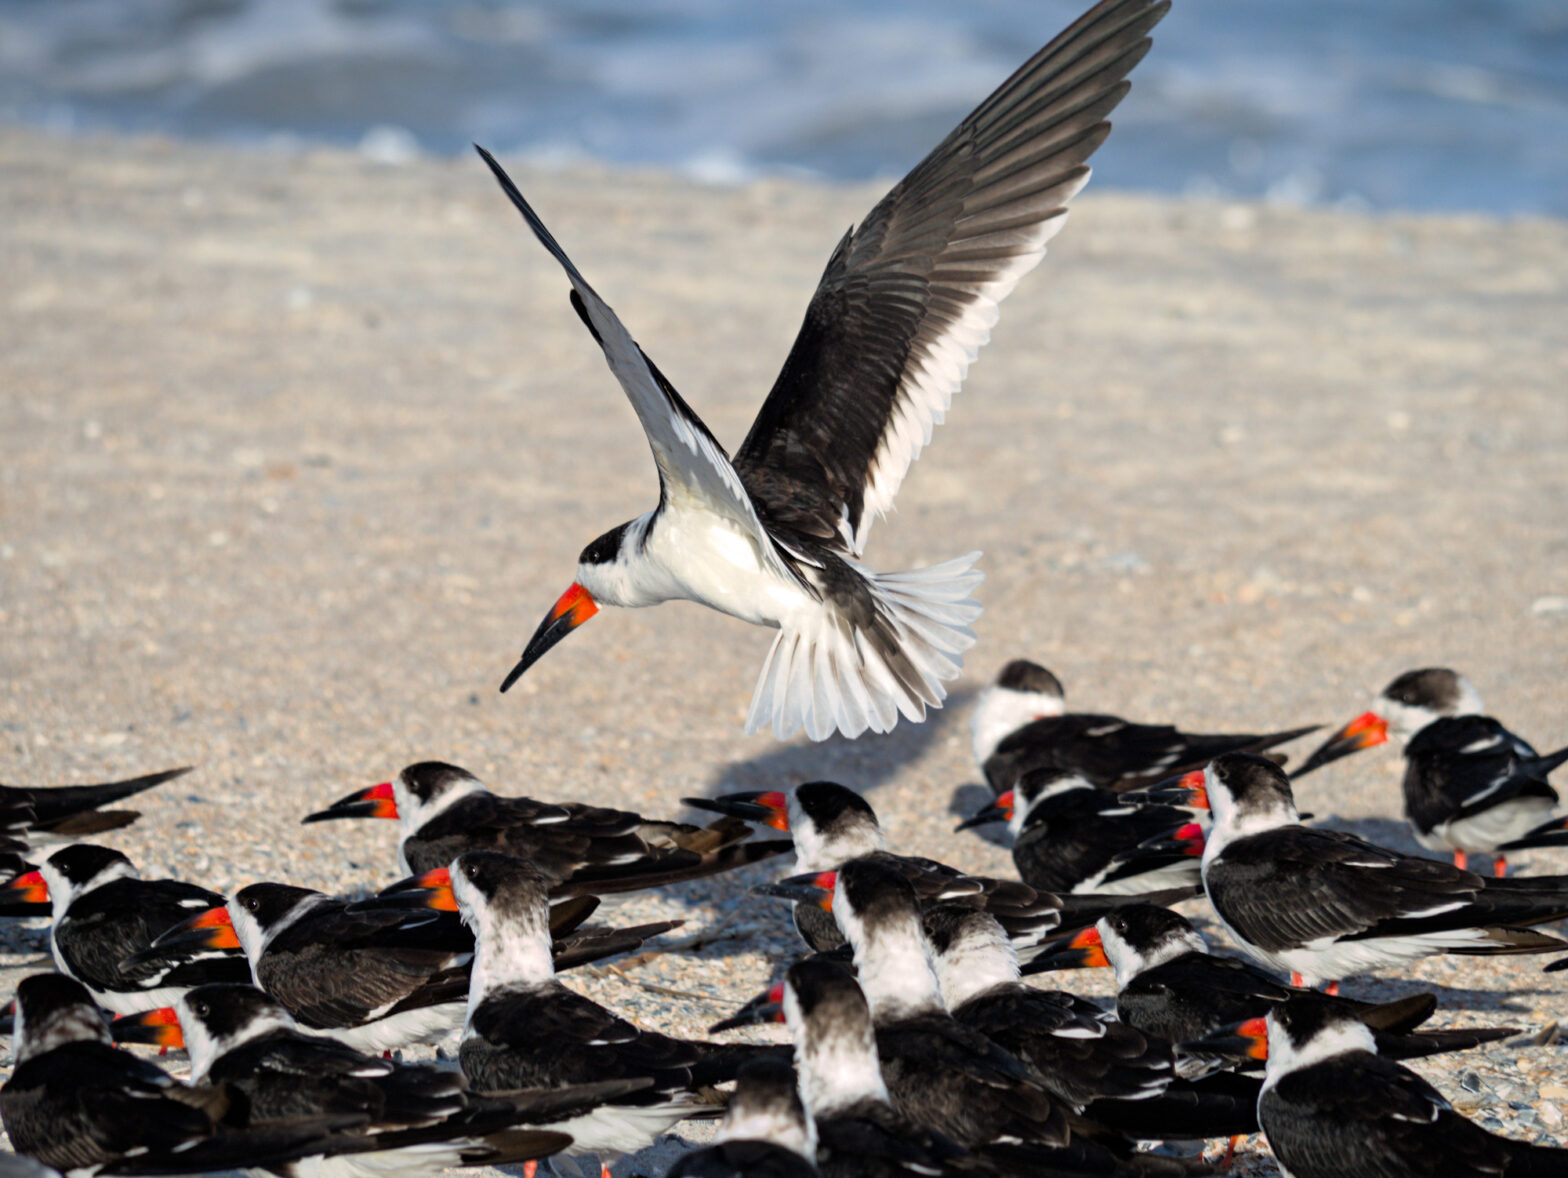 A single black skimmer hovers above several others